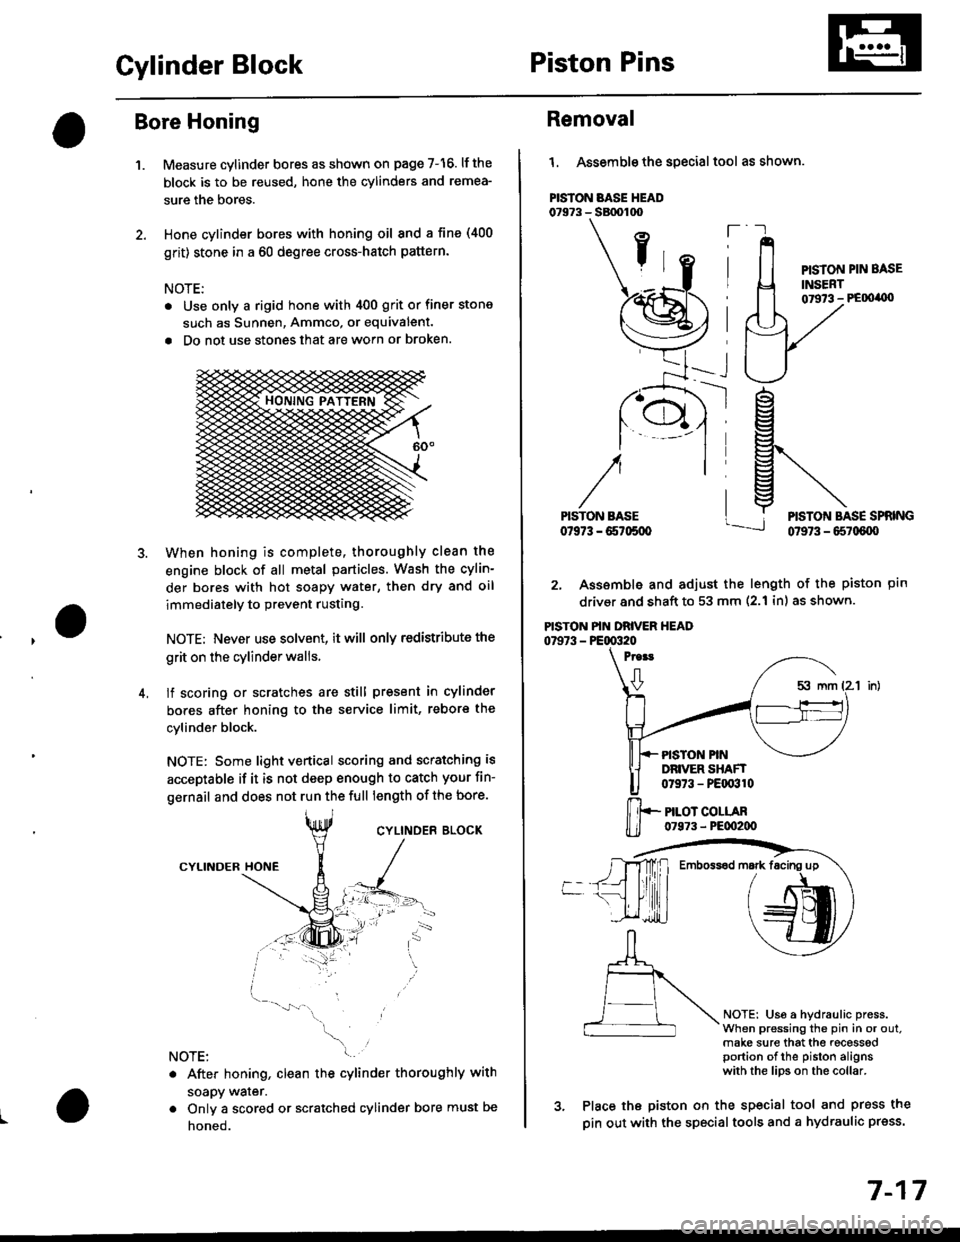 HONDA CIVIC 1997 6.G Owners Guide Cylinder BlockPiston Pins
Bore Honing
1.Measure cylinder bores as shown on page 7-16. lf the
block is to be reused, hone the cylinders and remea-
sure the bores.
Hone cylinder bores with honing oil 8n